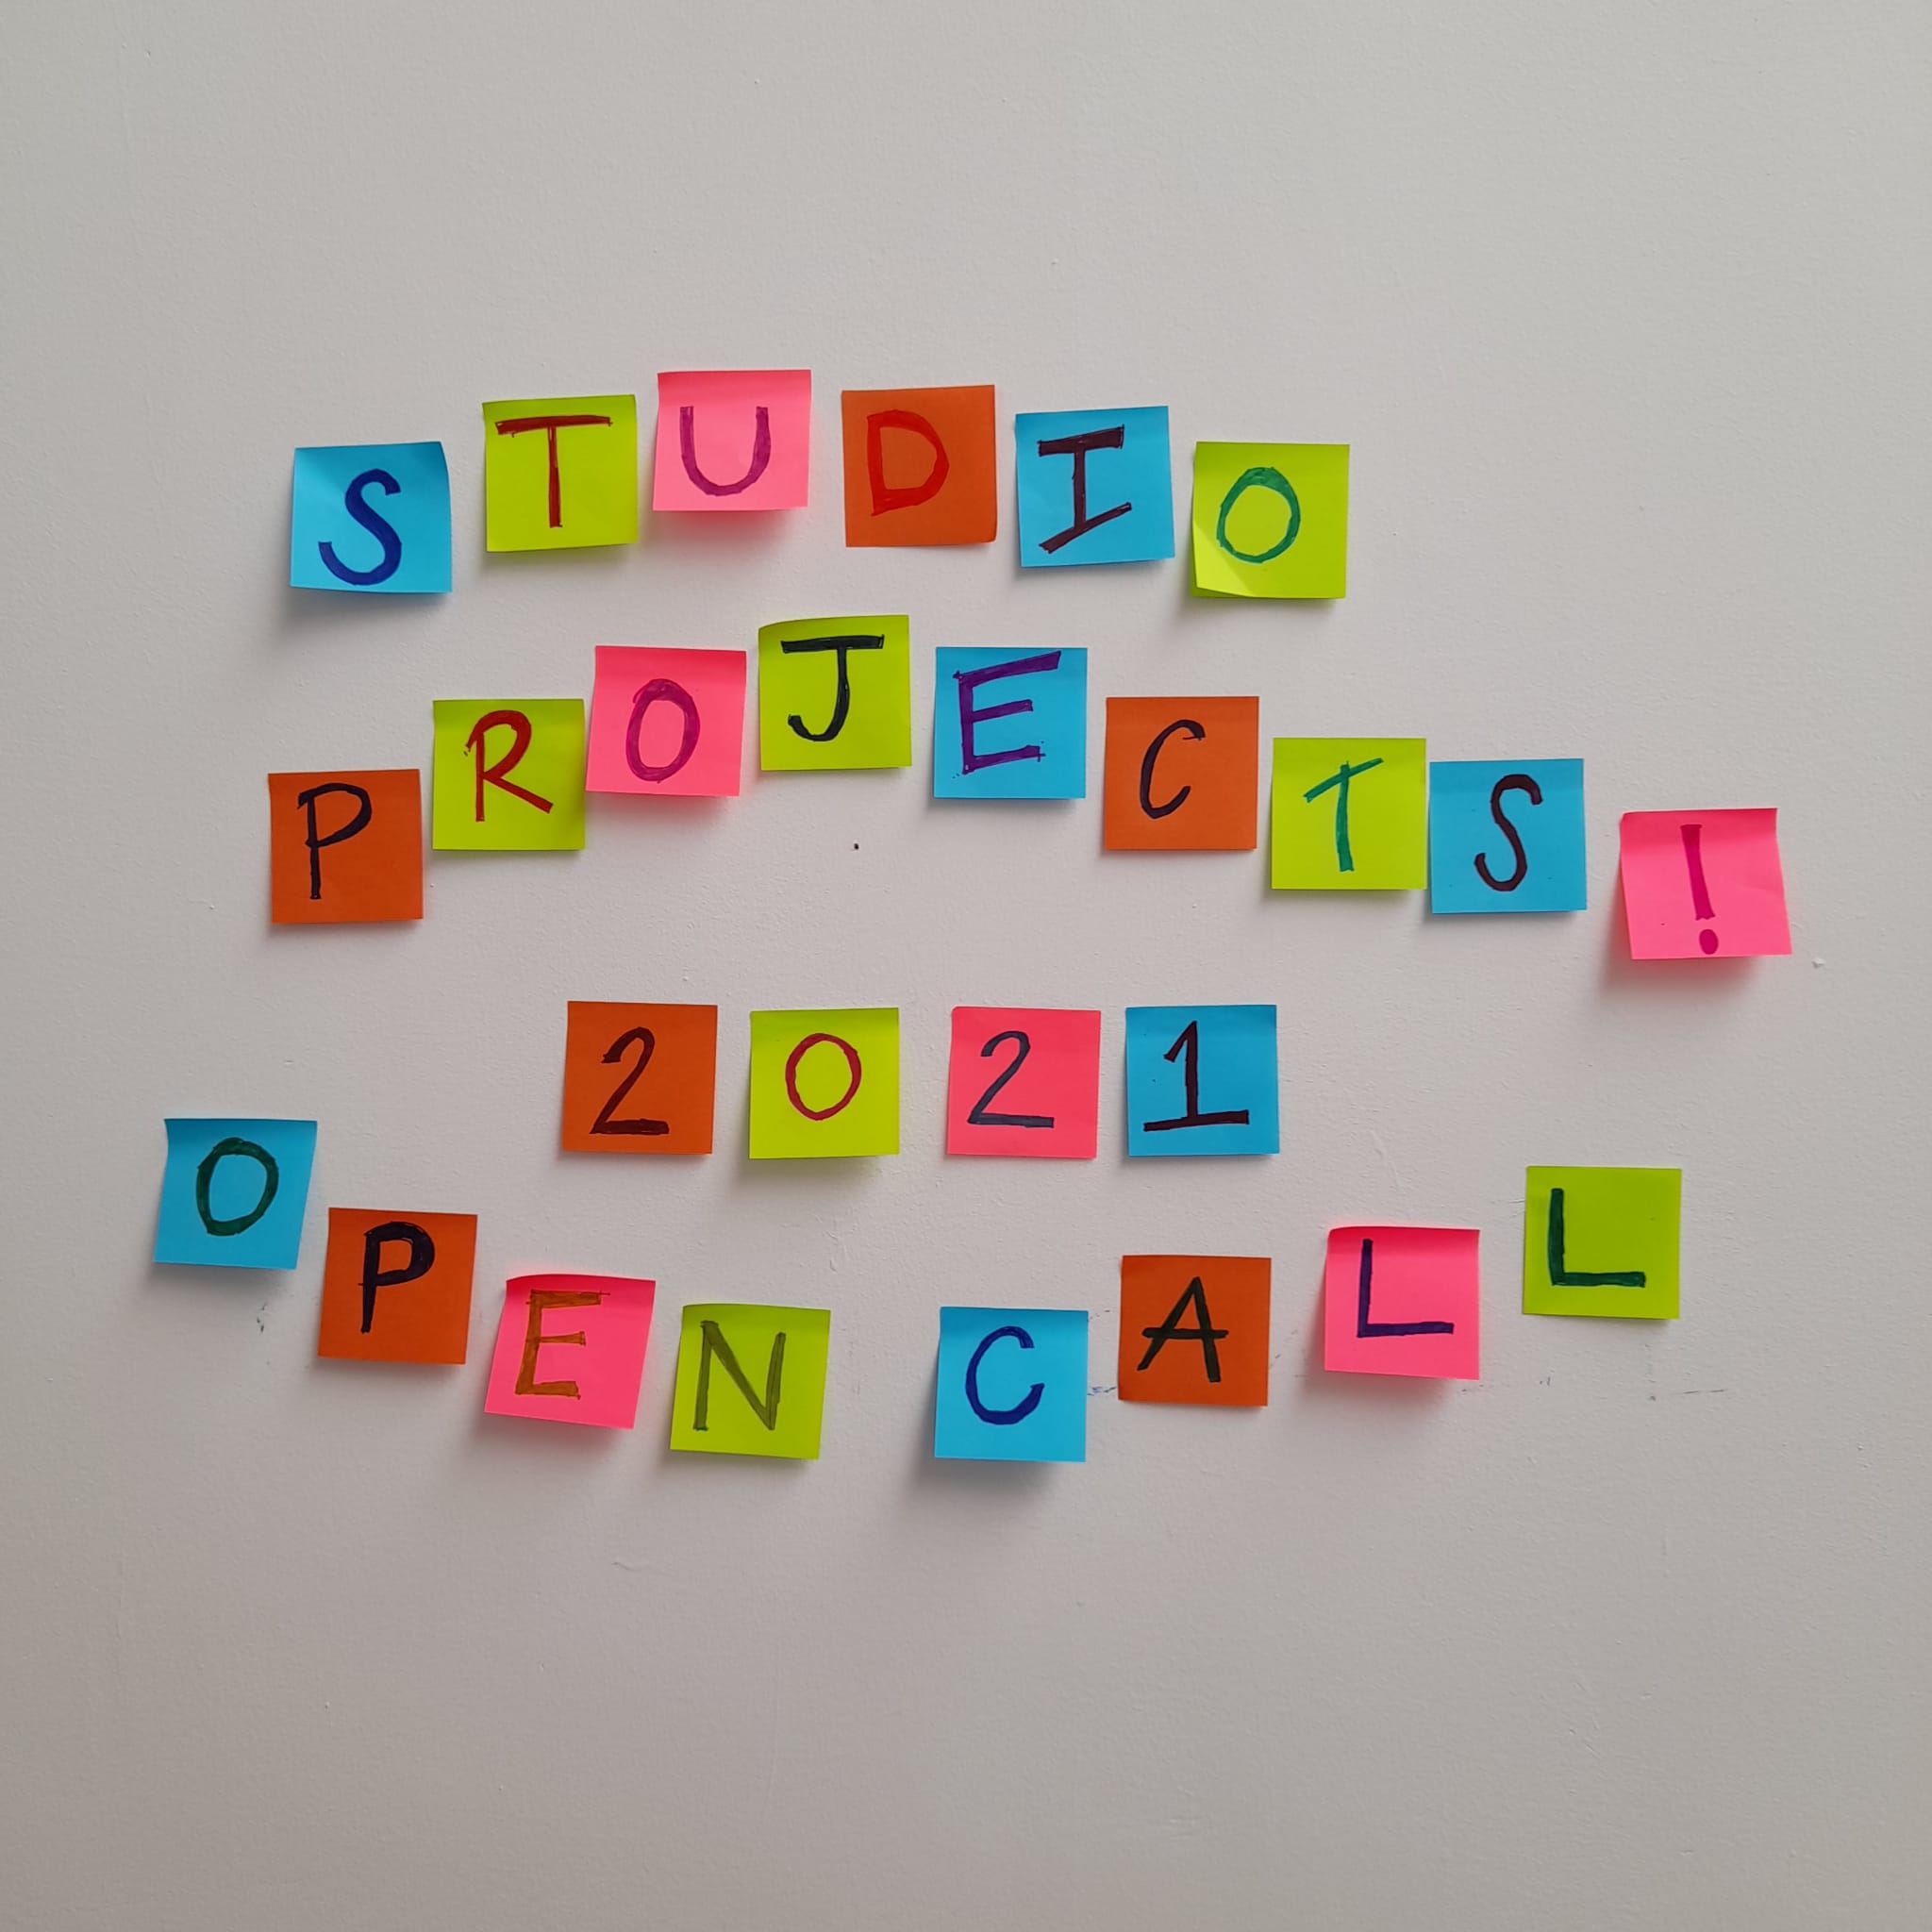 "Studio Projects! 2021 Open Call" hand-written on colourful post-its, with each post-it having one letter, stuck slightly wonky on a wall